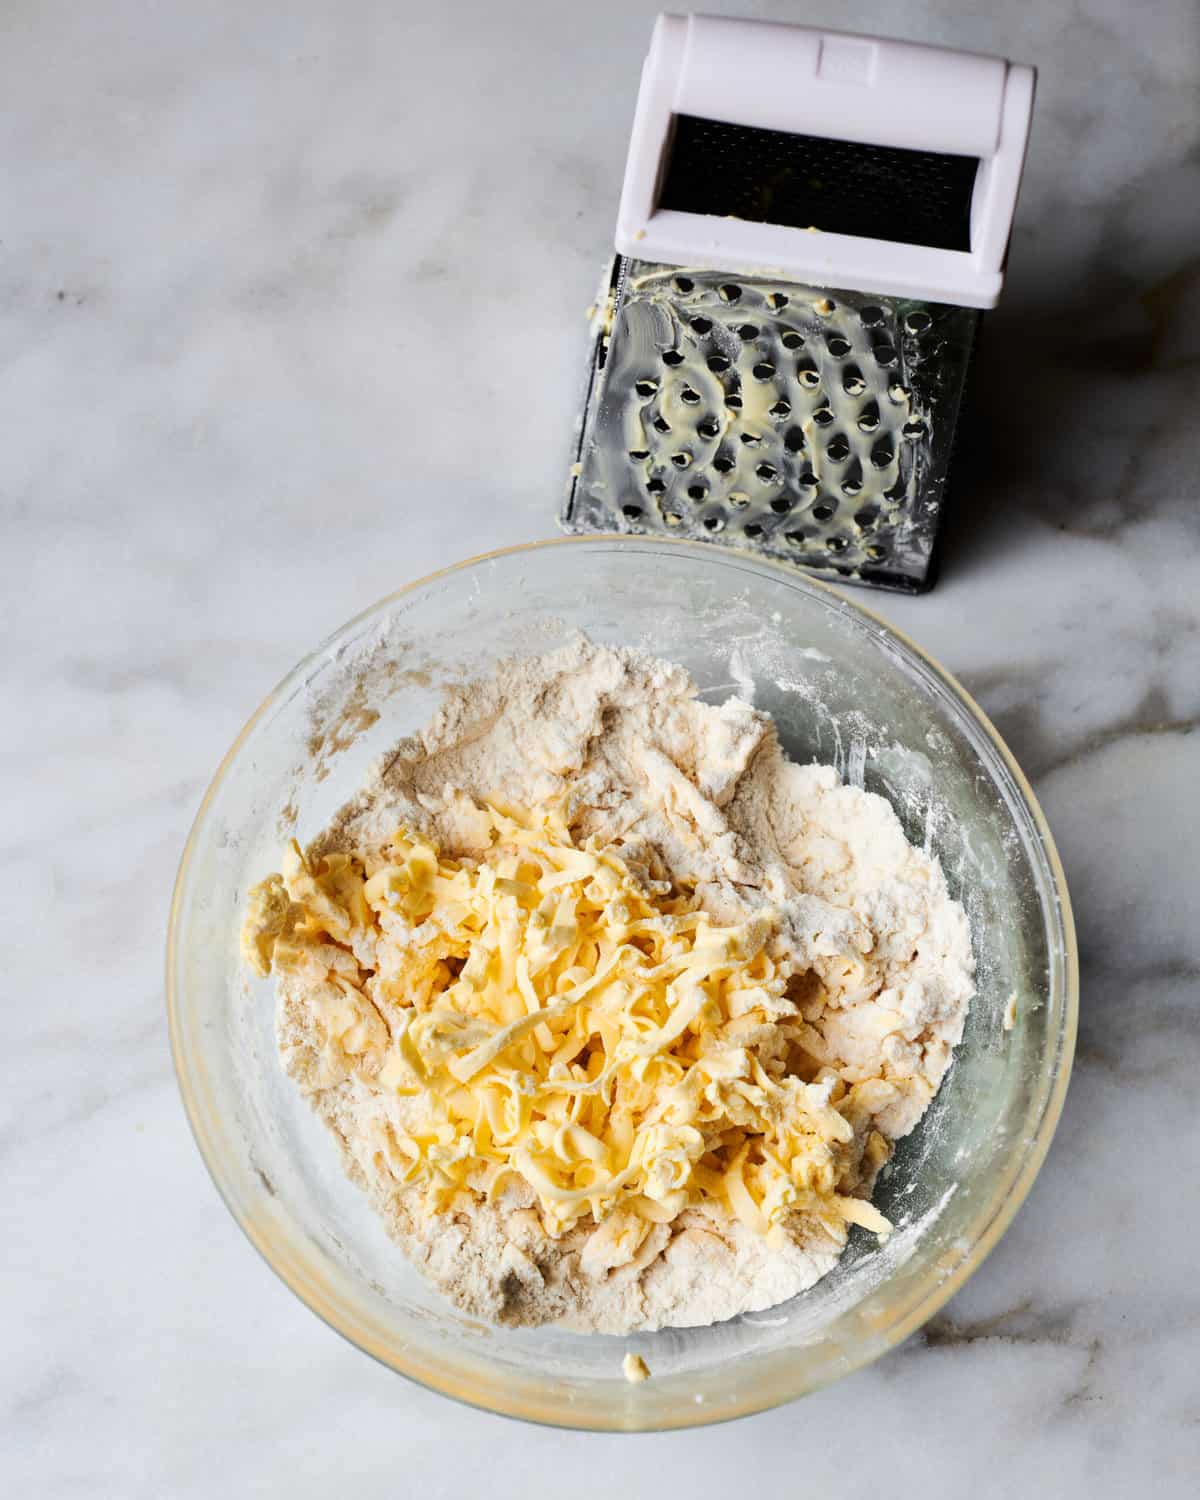 butter being grated in bowl on top of flour.